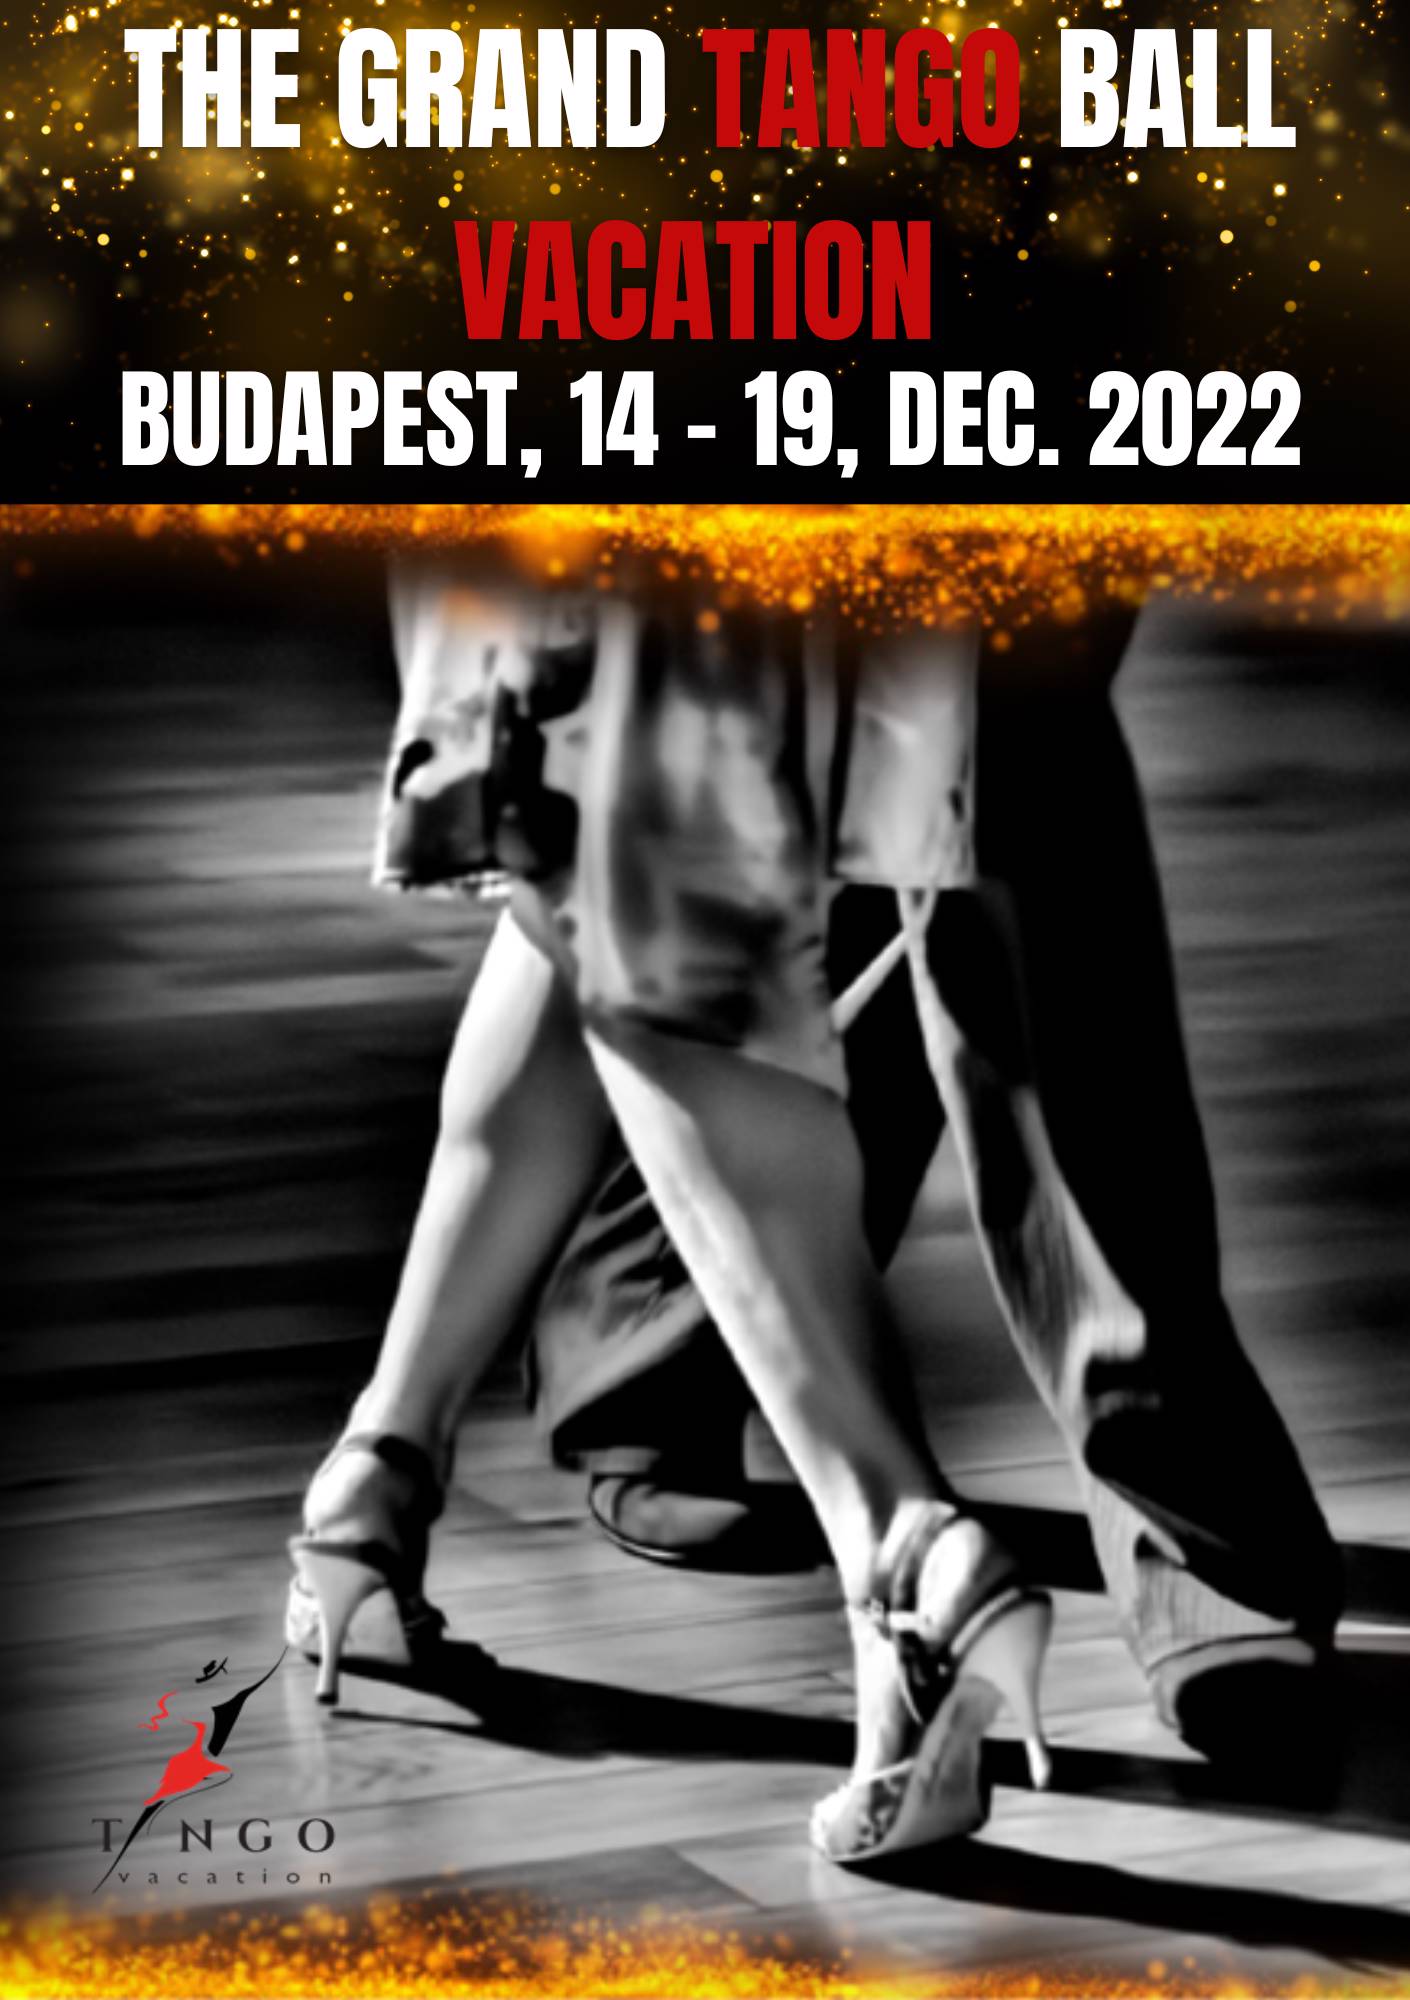 Flyer The Budapest Grand Tango Ball Vacation 14 - 19, Dec. 2022